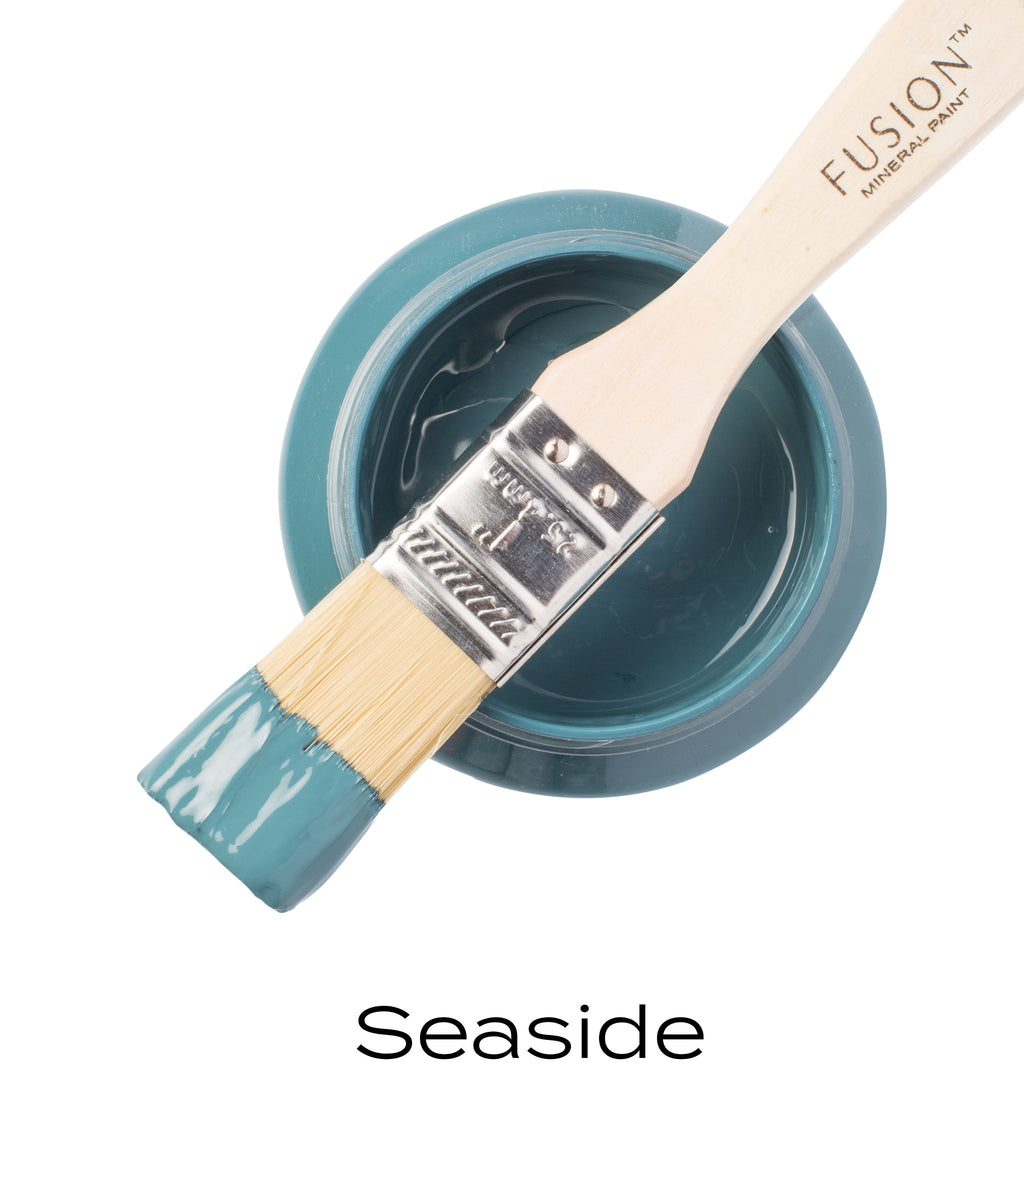 Seaside Fusion Mineral Paint Near Me